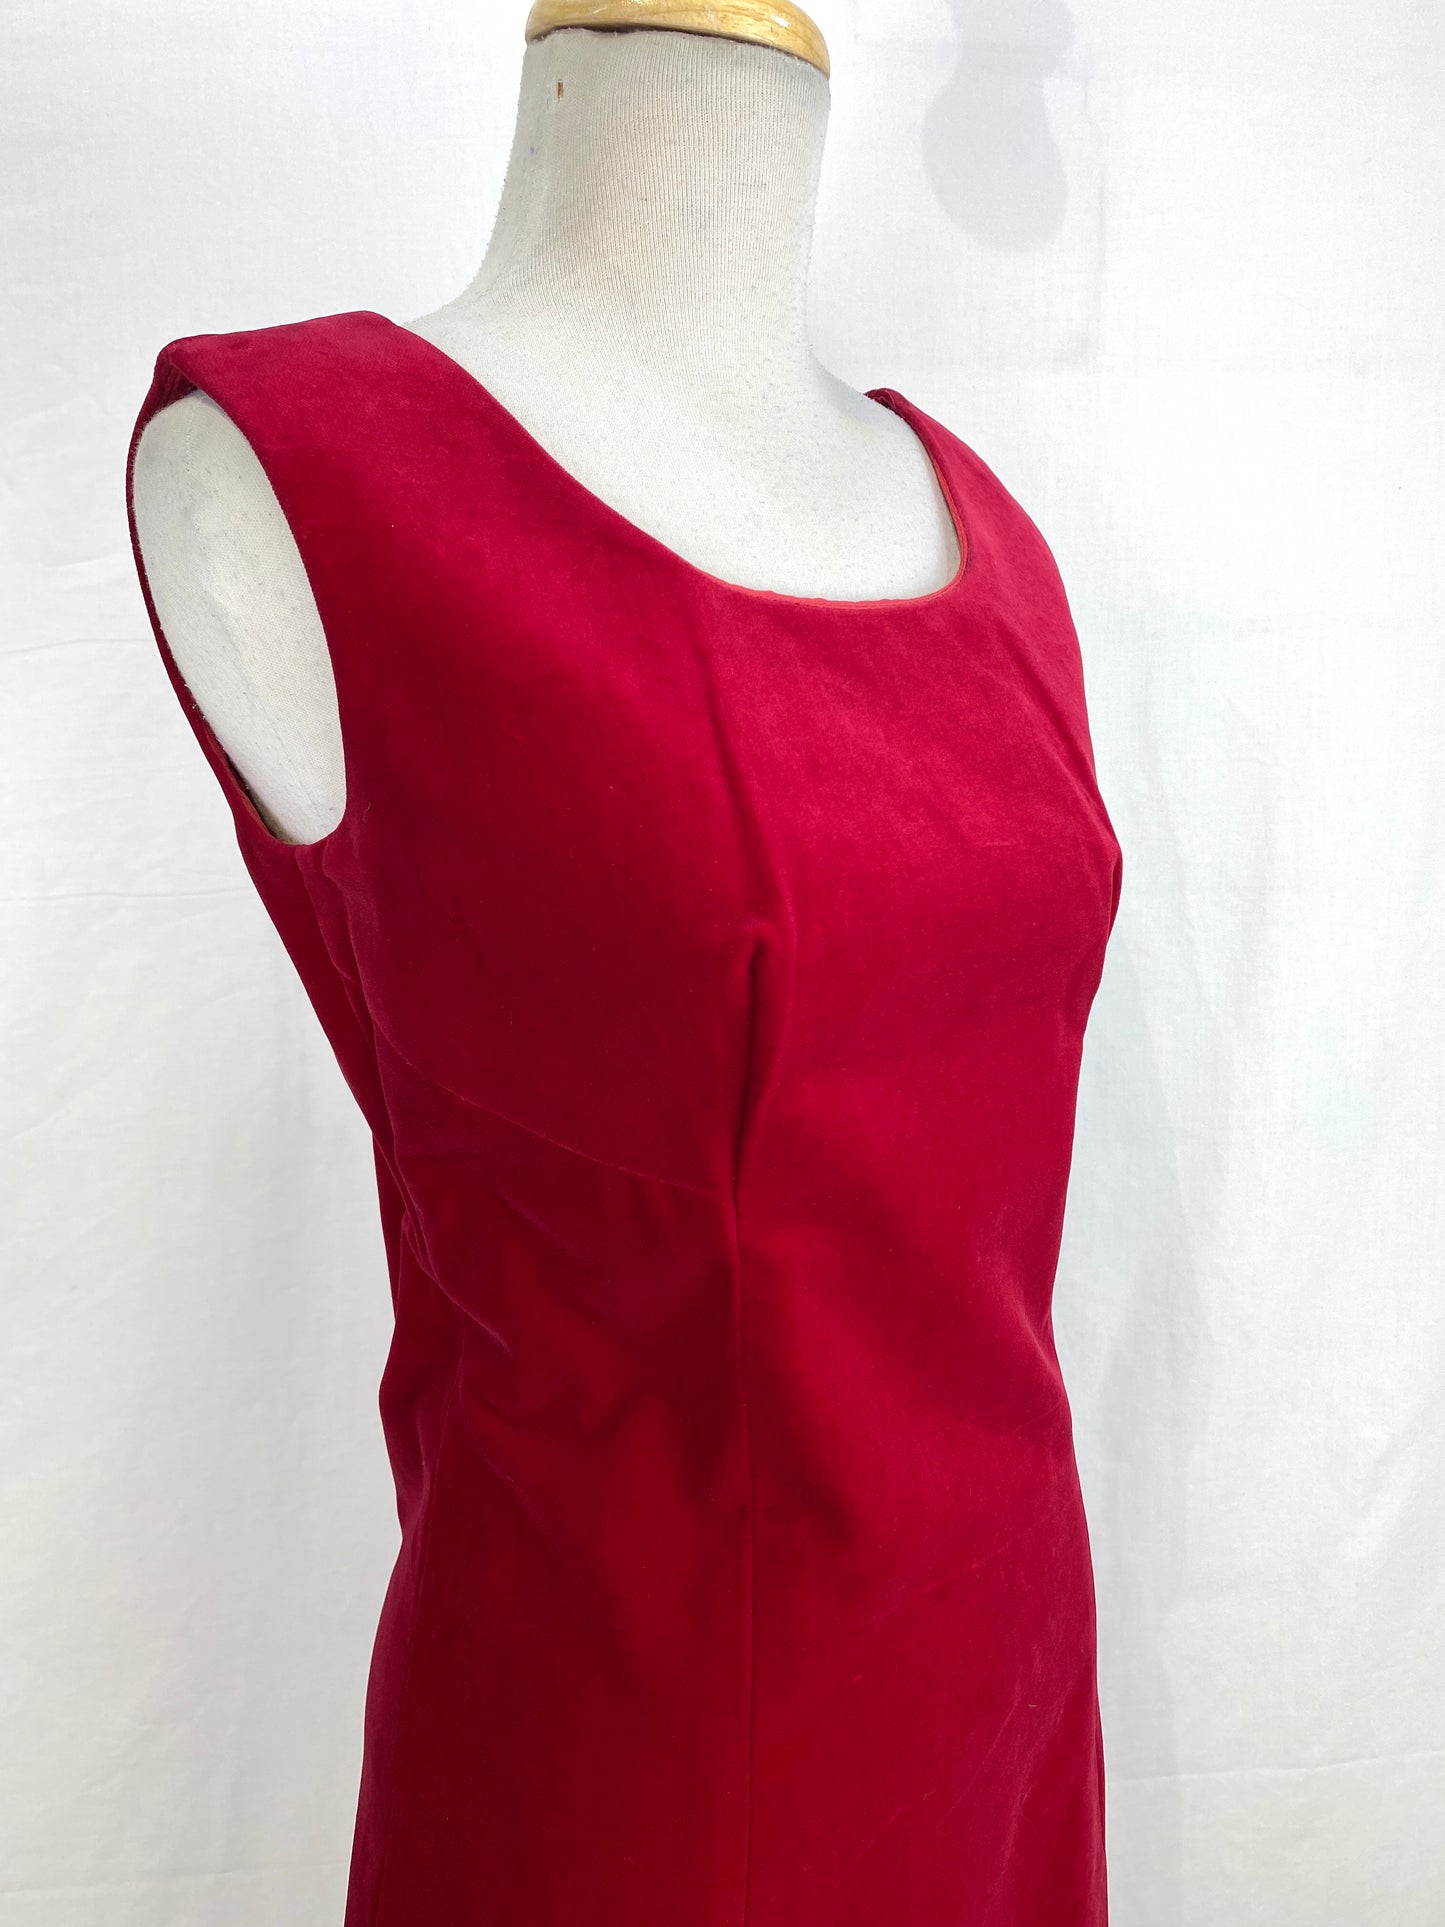 Vintage 1950s Red Velour Shift Dress, Small